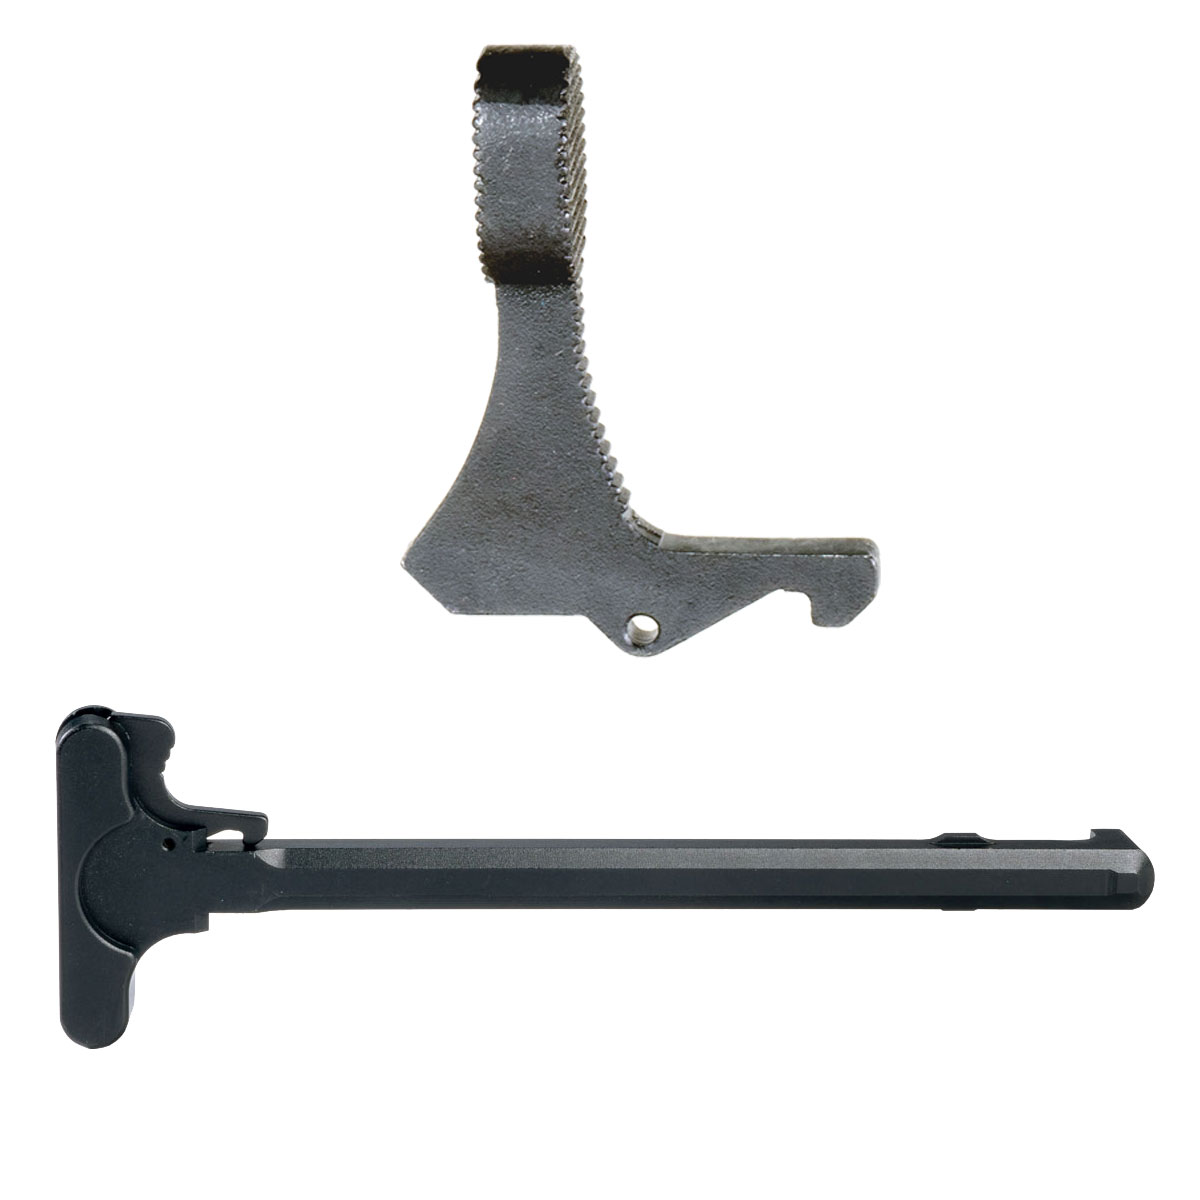 AR-15 Charging Handle Enhancement Kit: AR-15 Extended Tactical Charging Handle Latch + Recoil Technologies AR-15 Mil-Spec Charging Handle